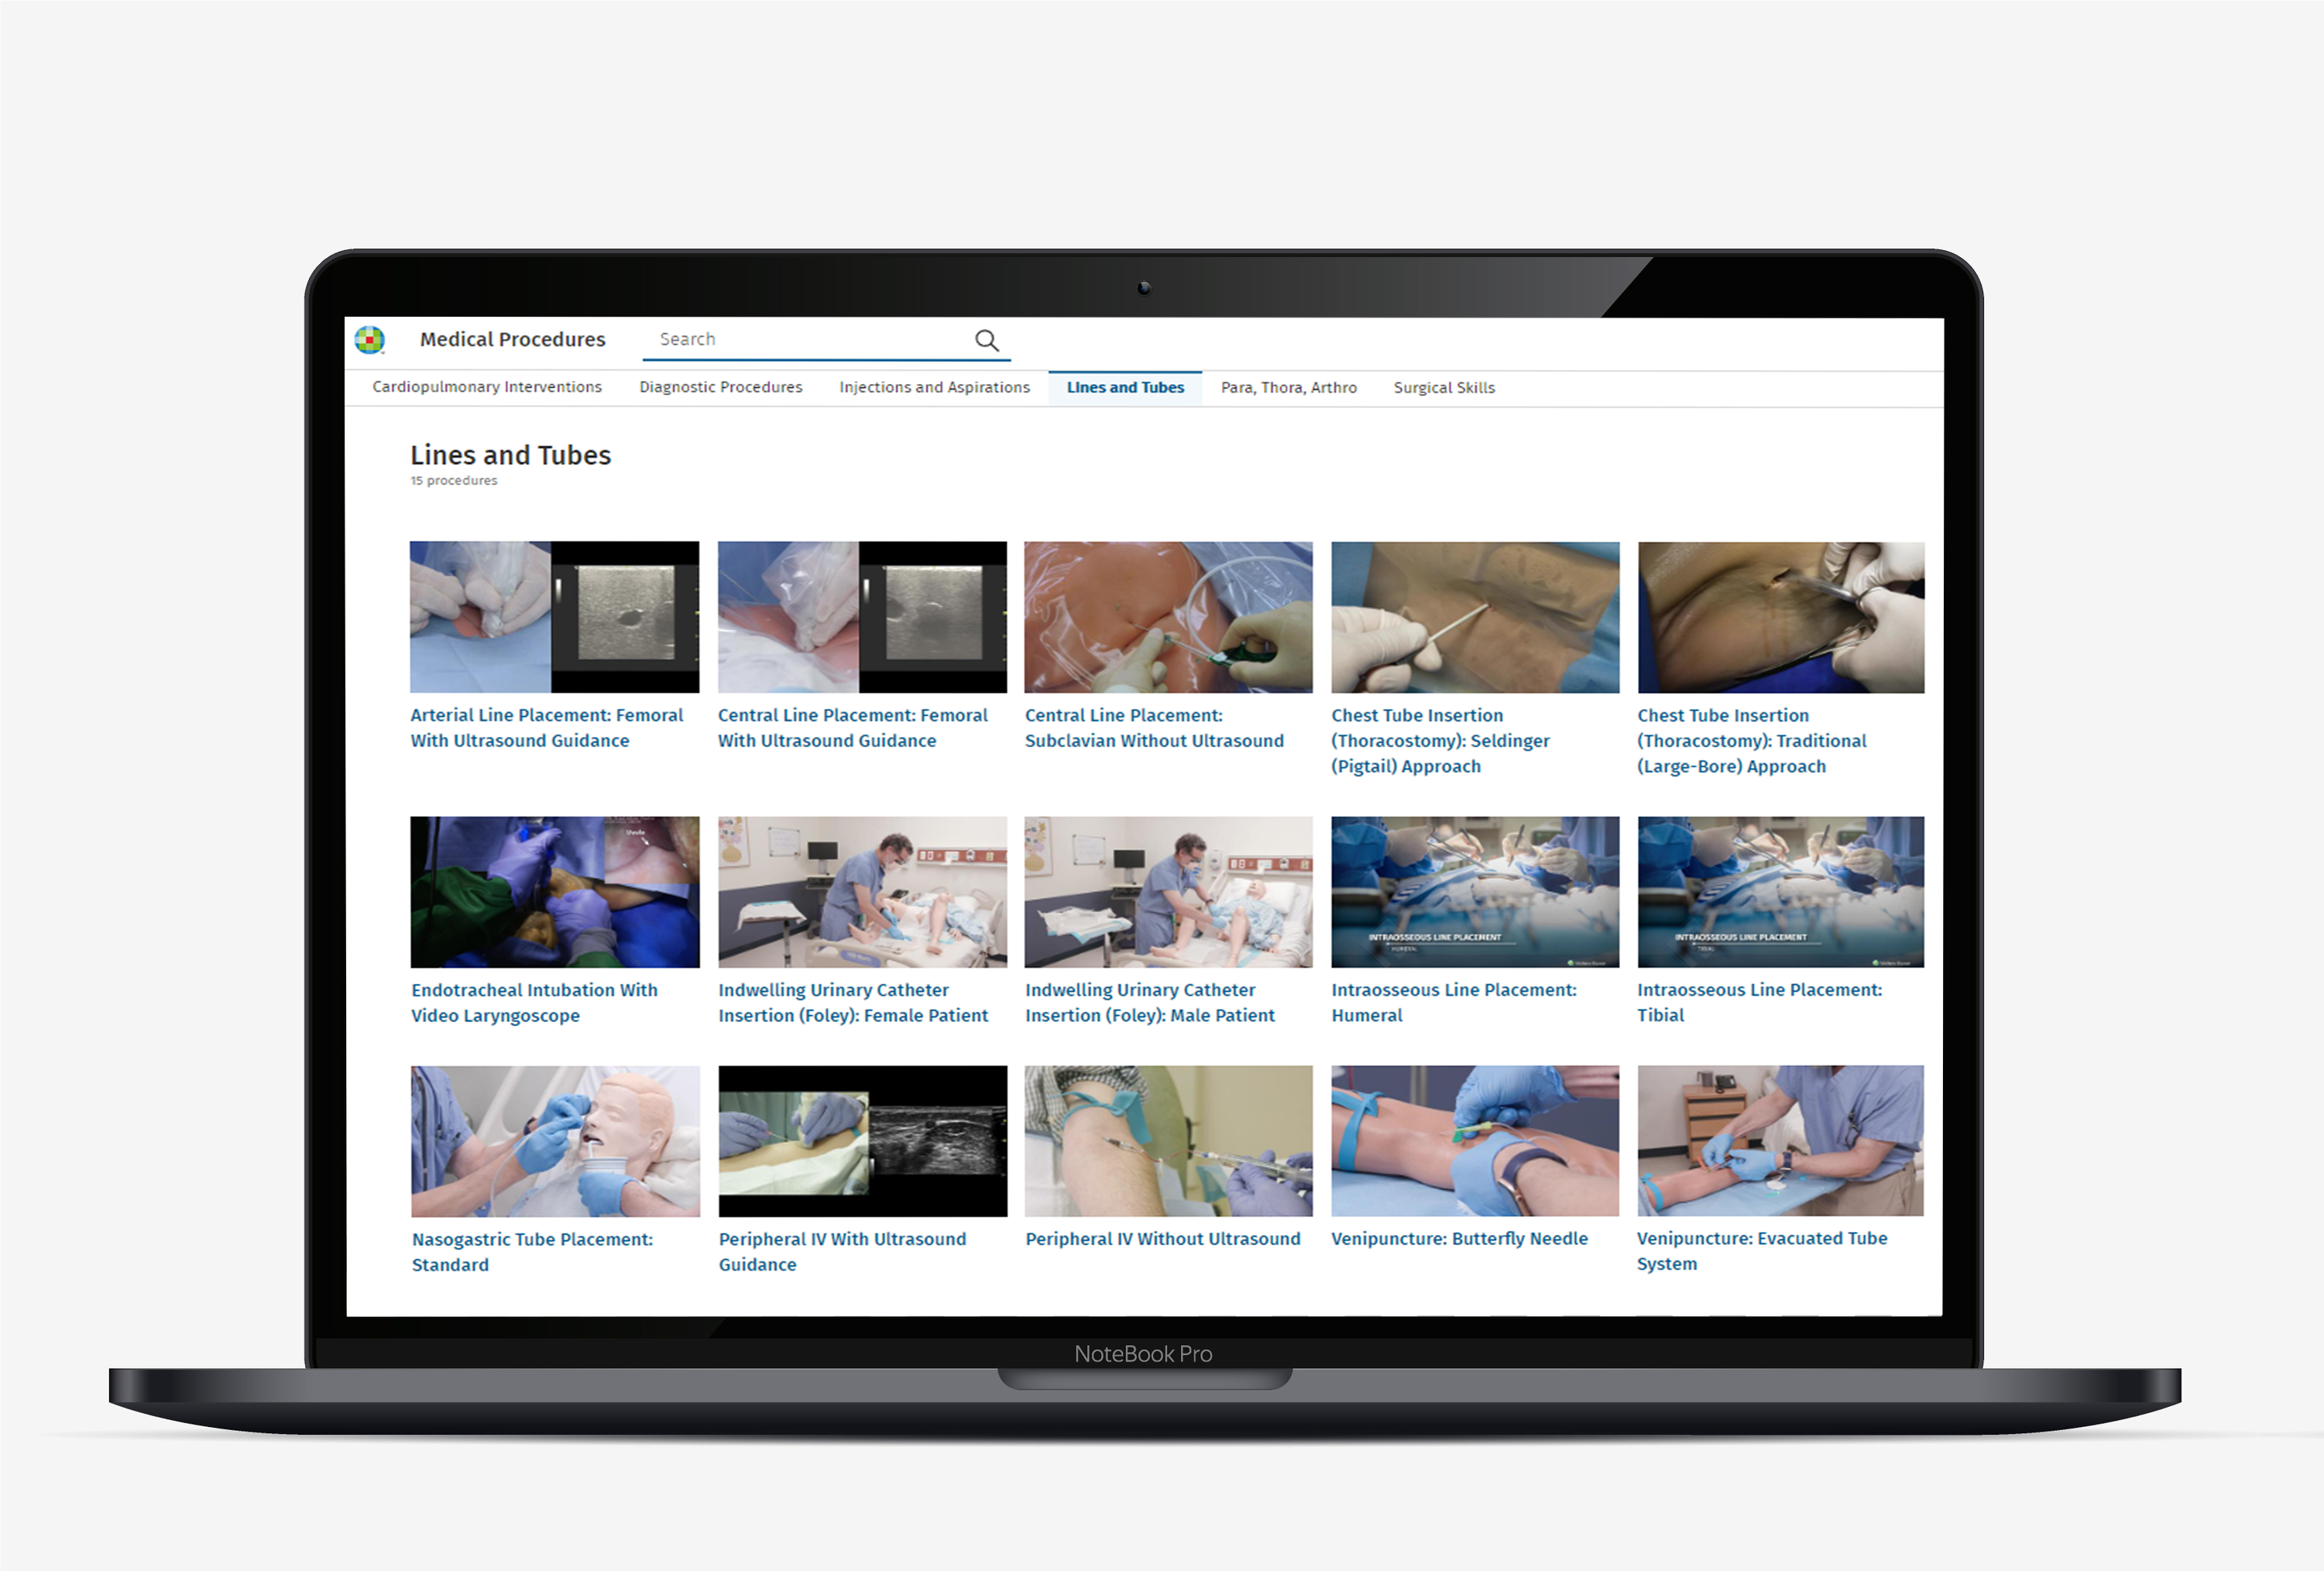 A user searching Lippincott Medical Procedures for videos about lines and tubes